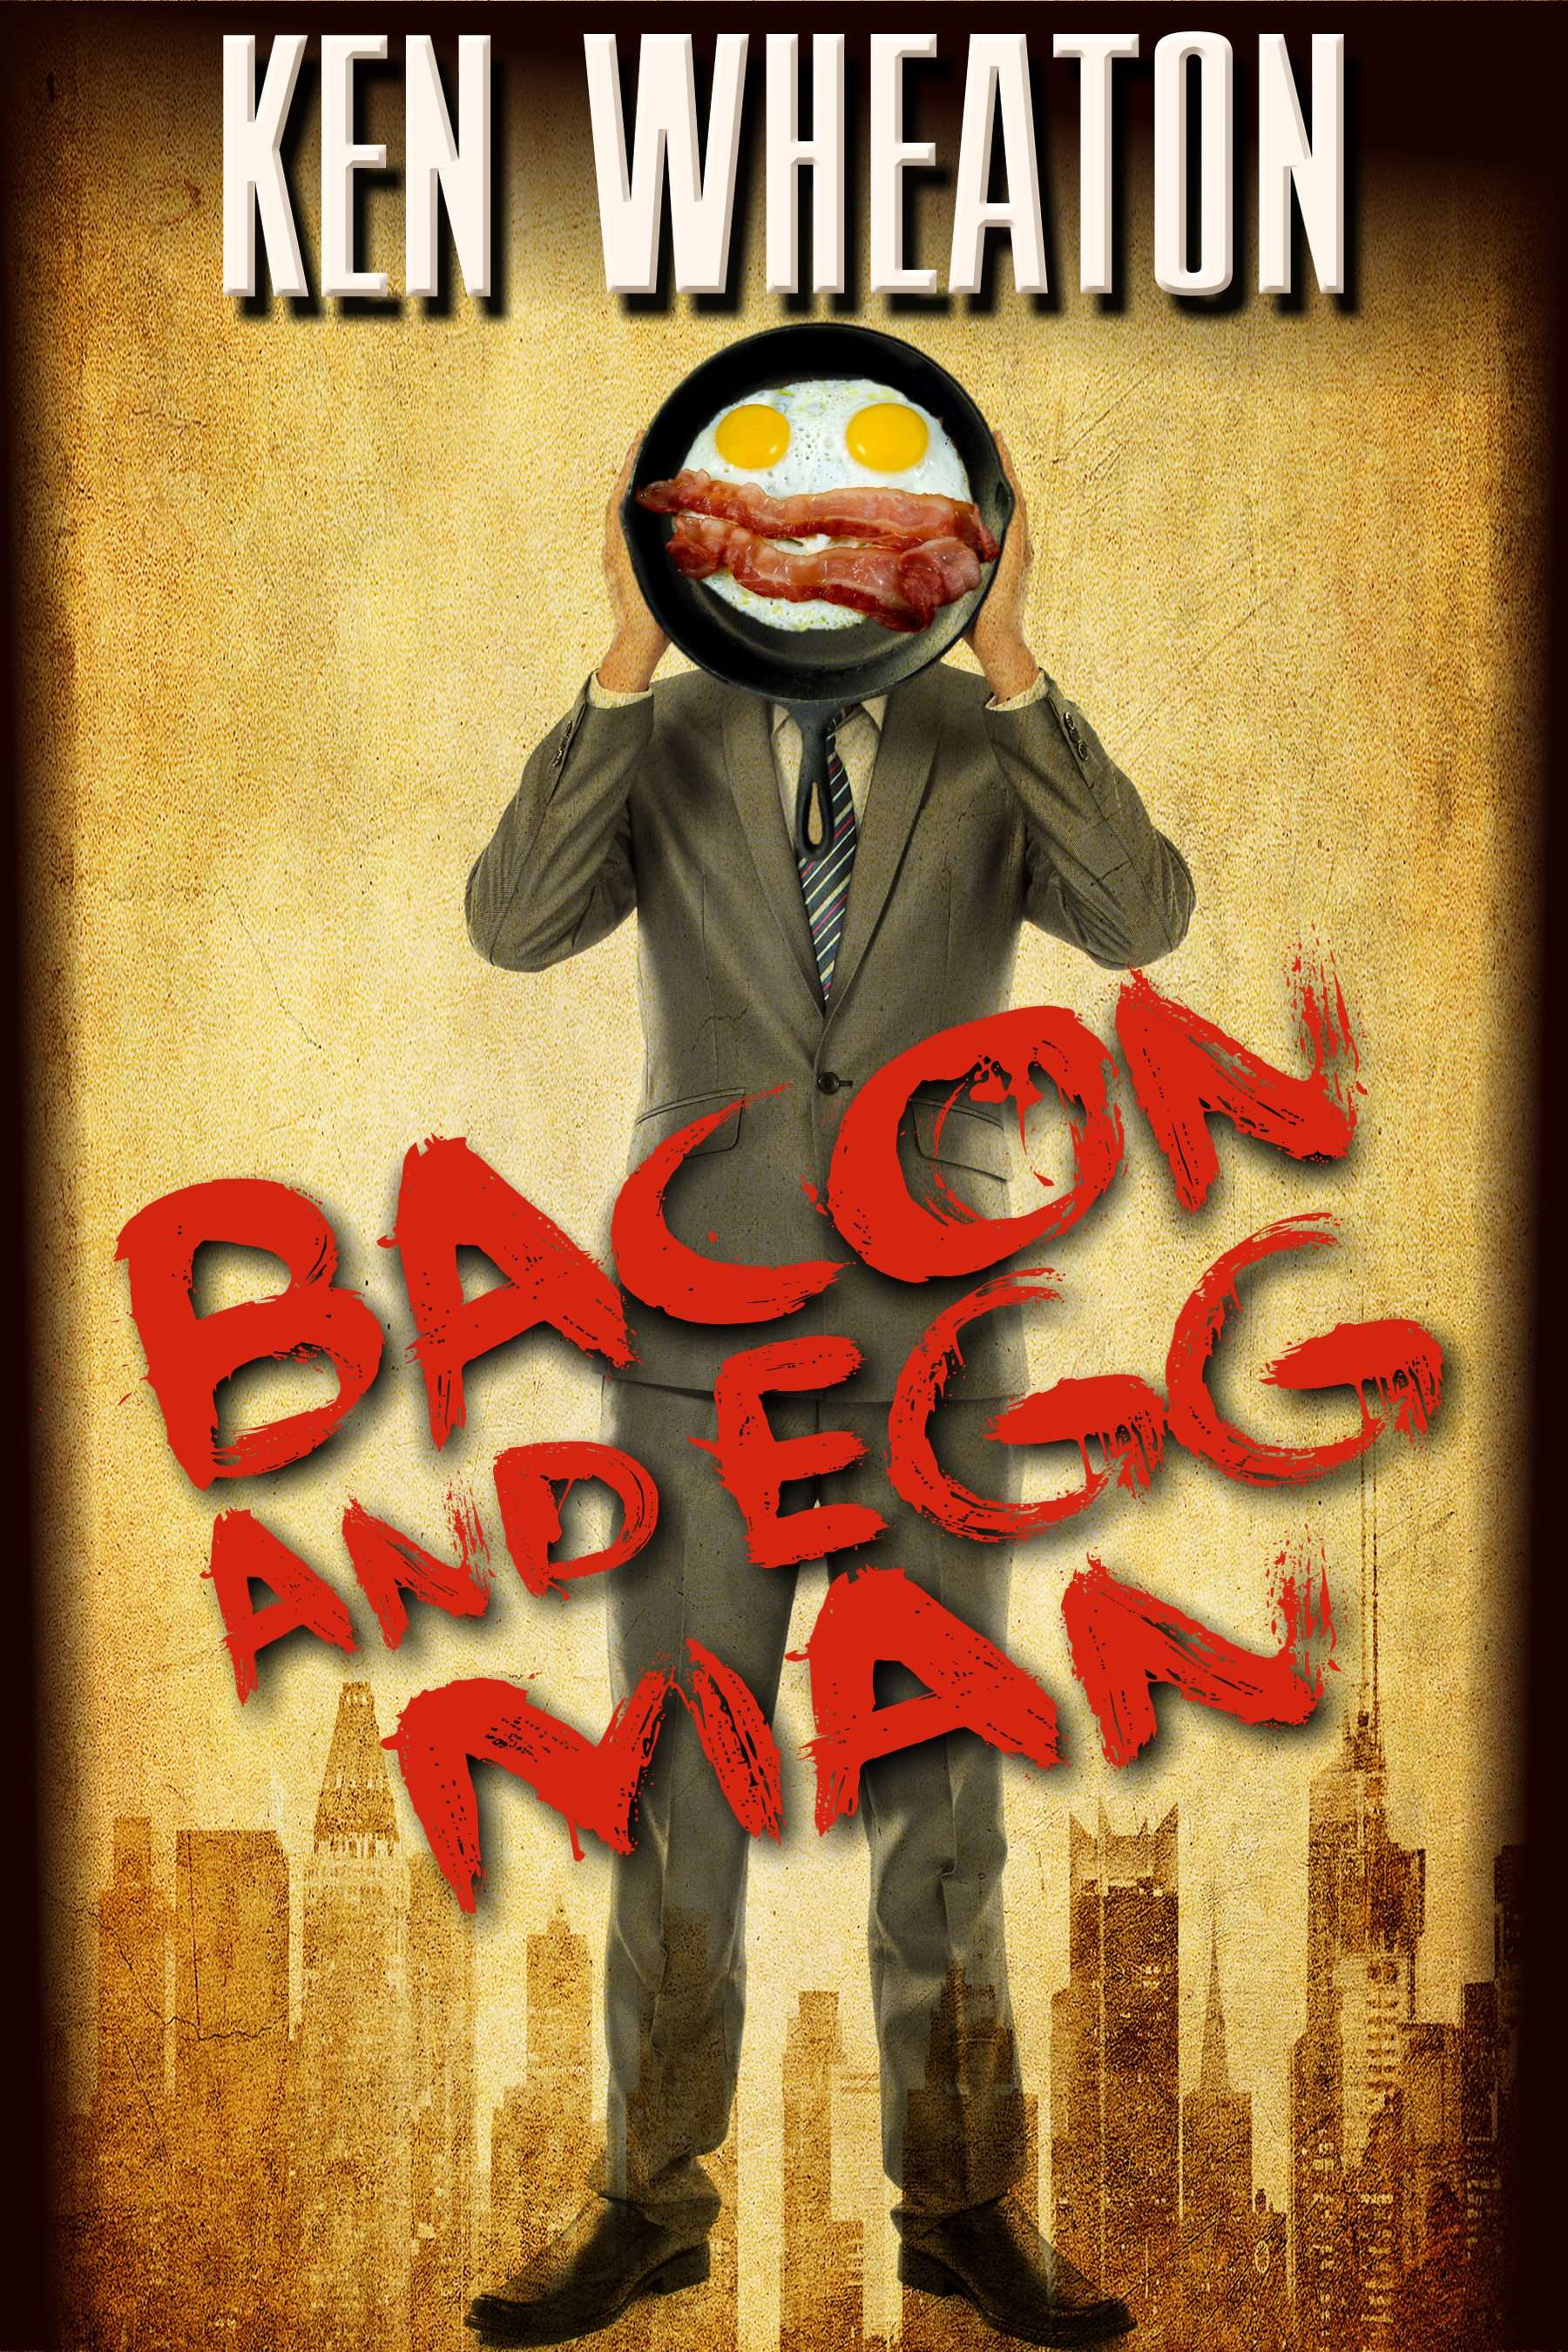 Bacon and Egg Man